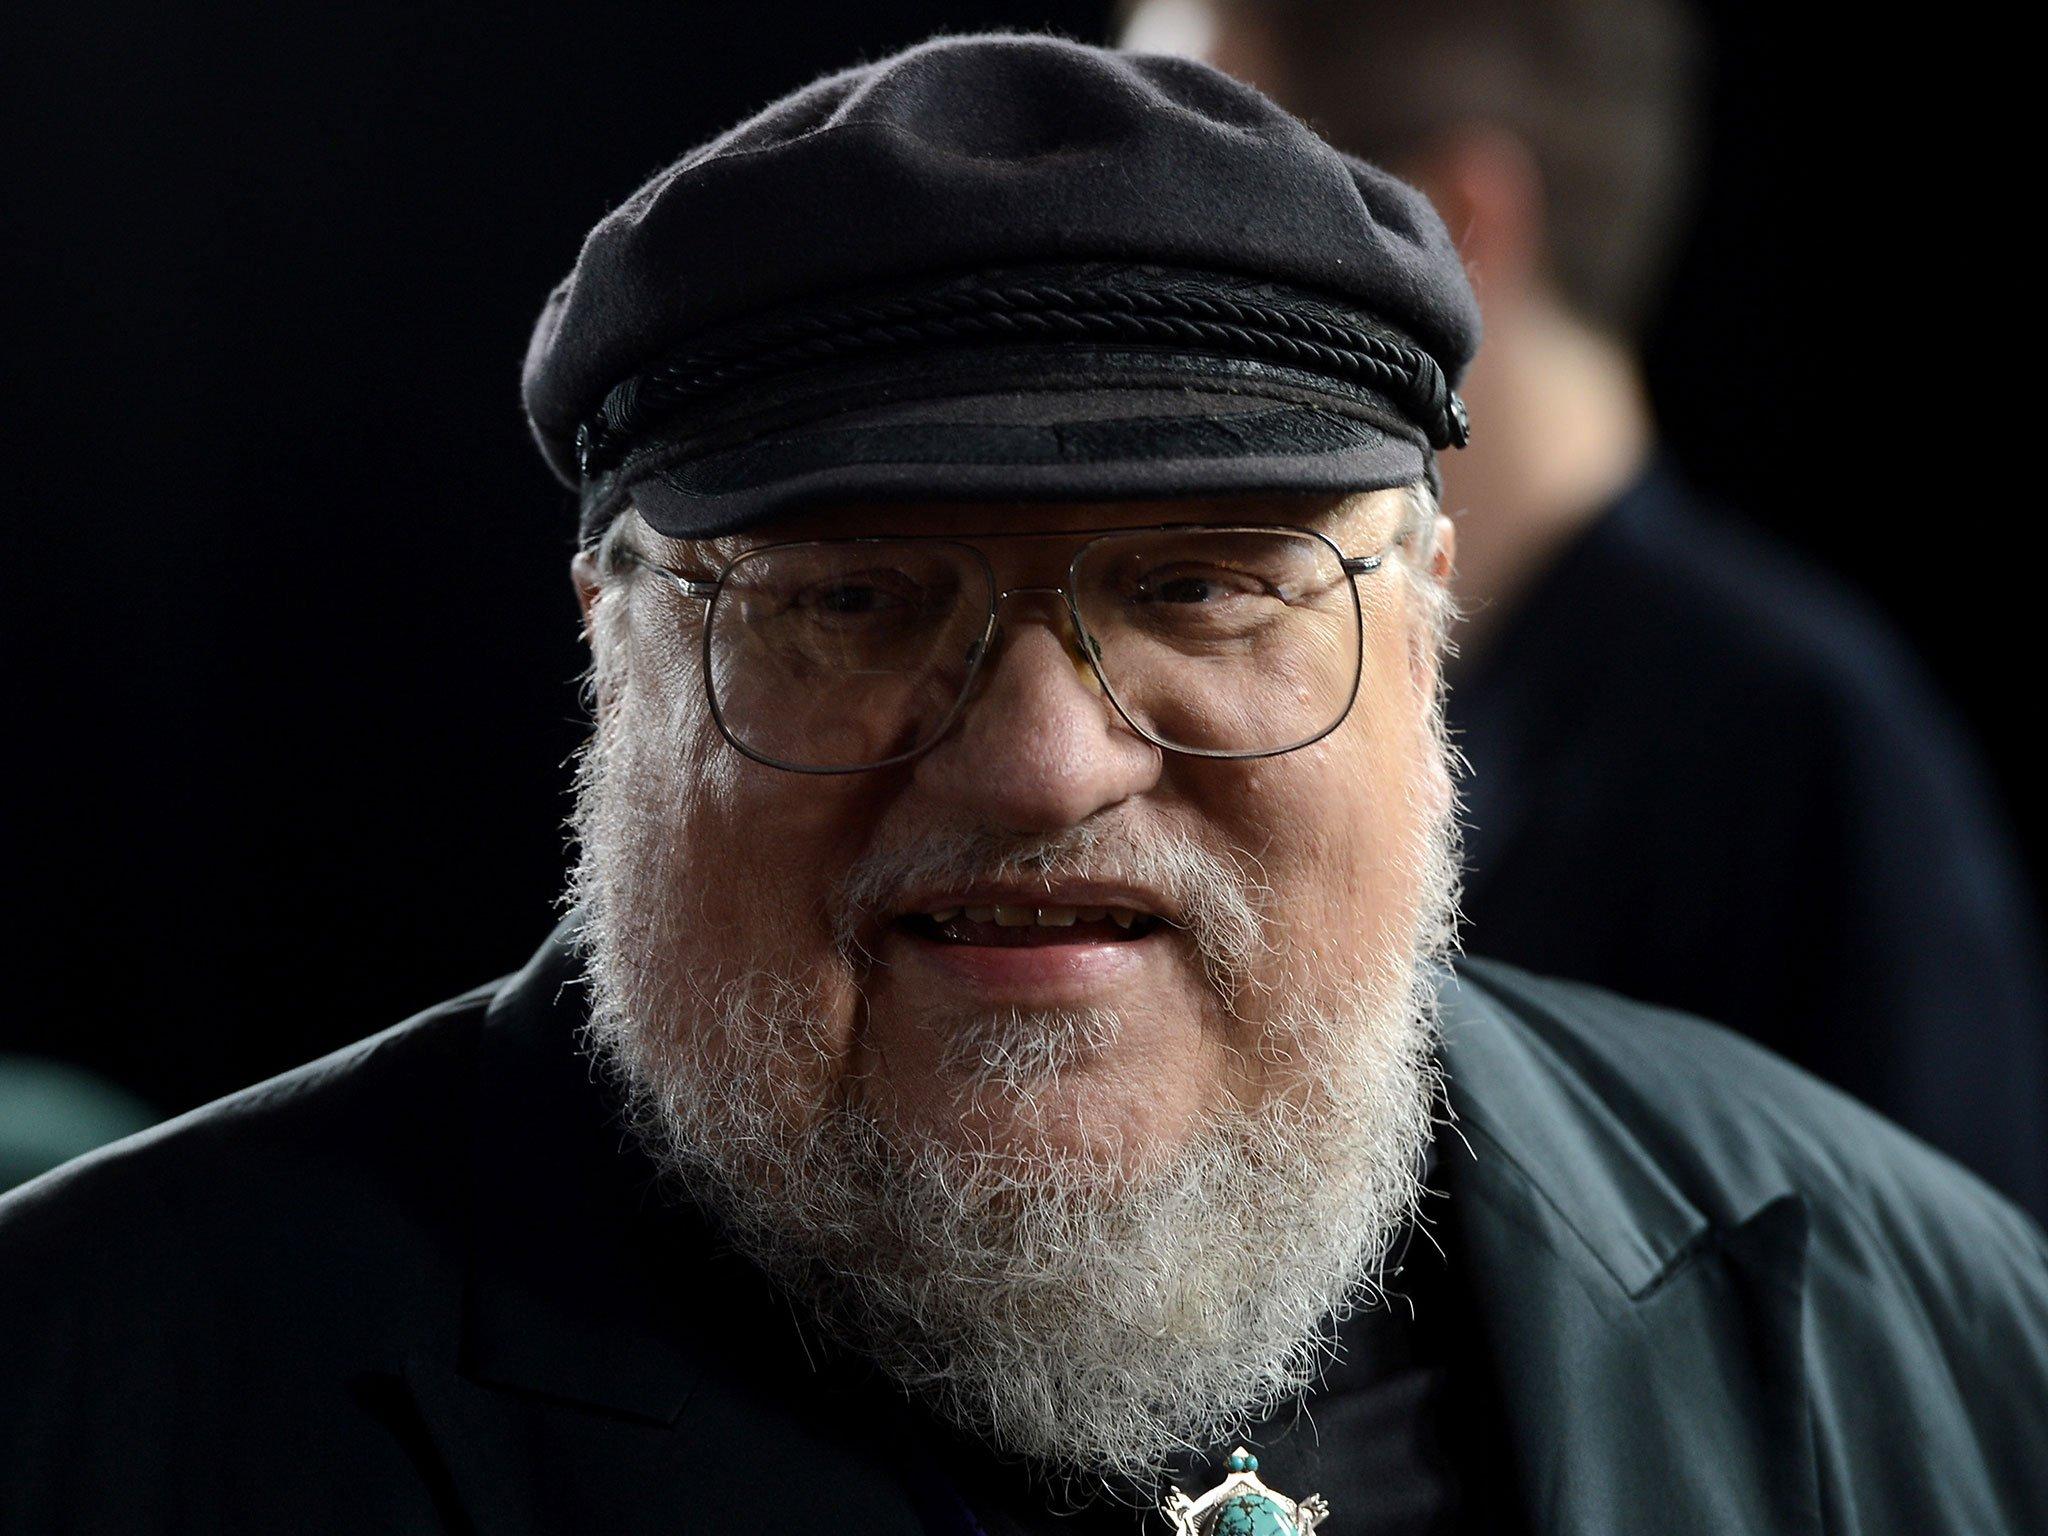 George RR Martin on why he kills off Game of Thrones characters